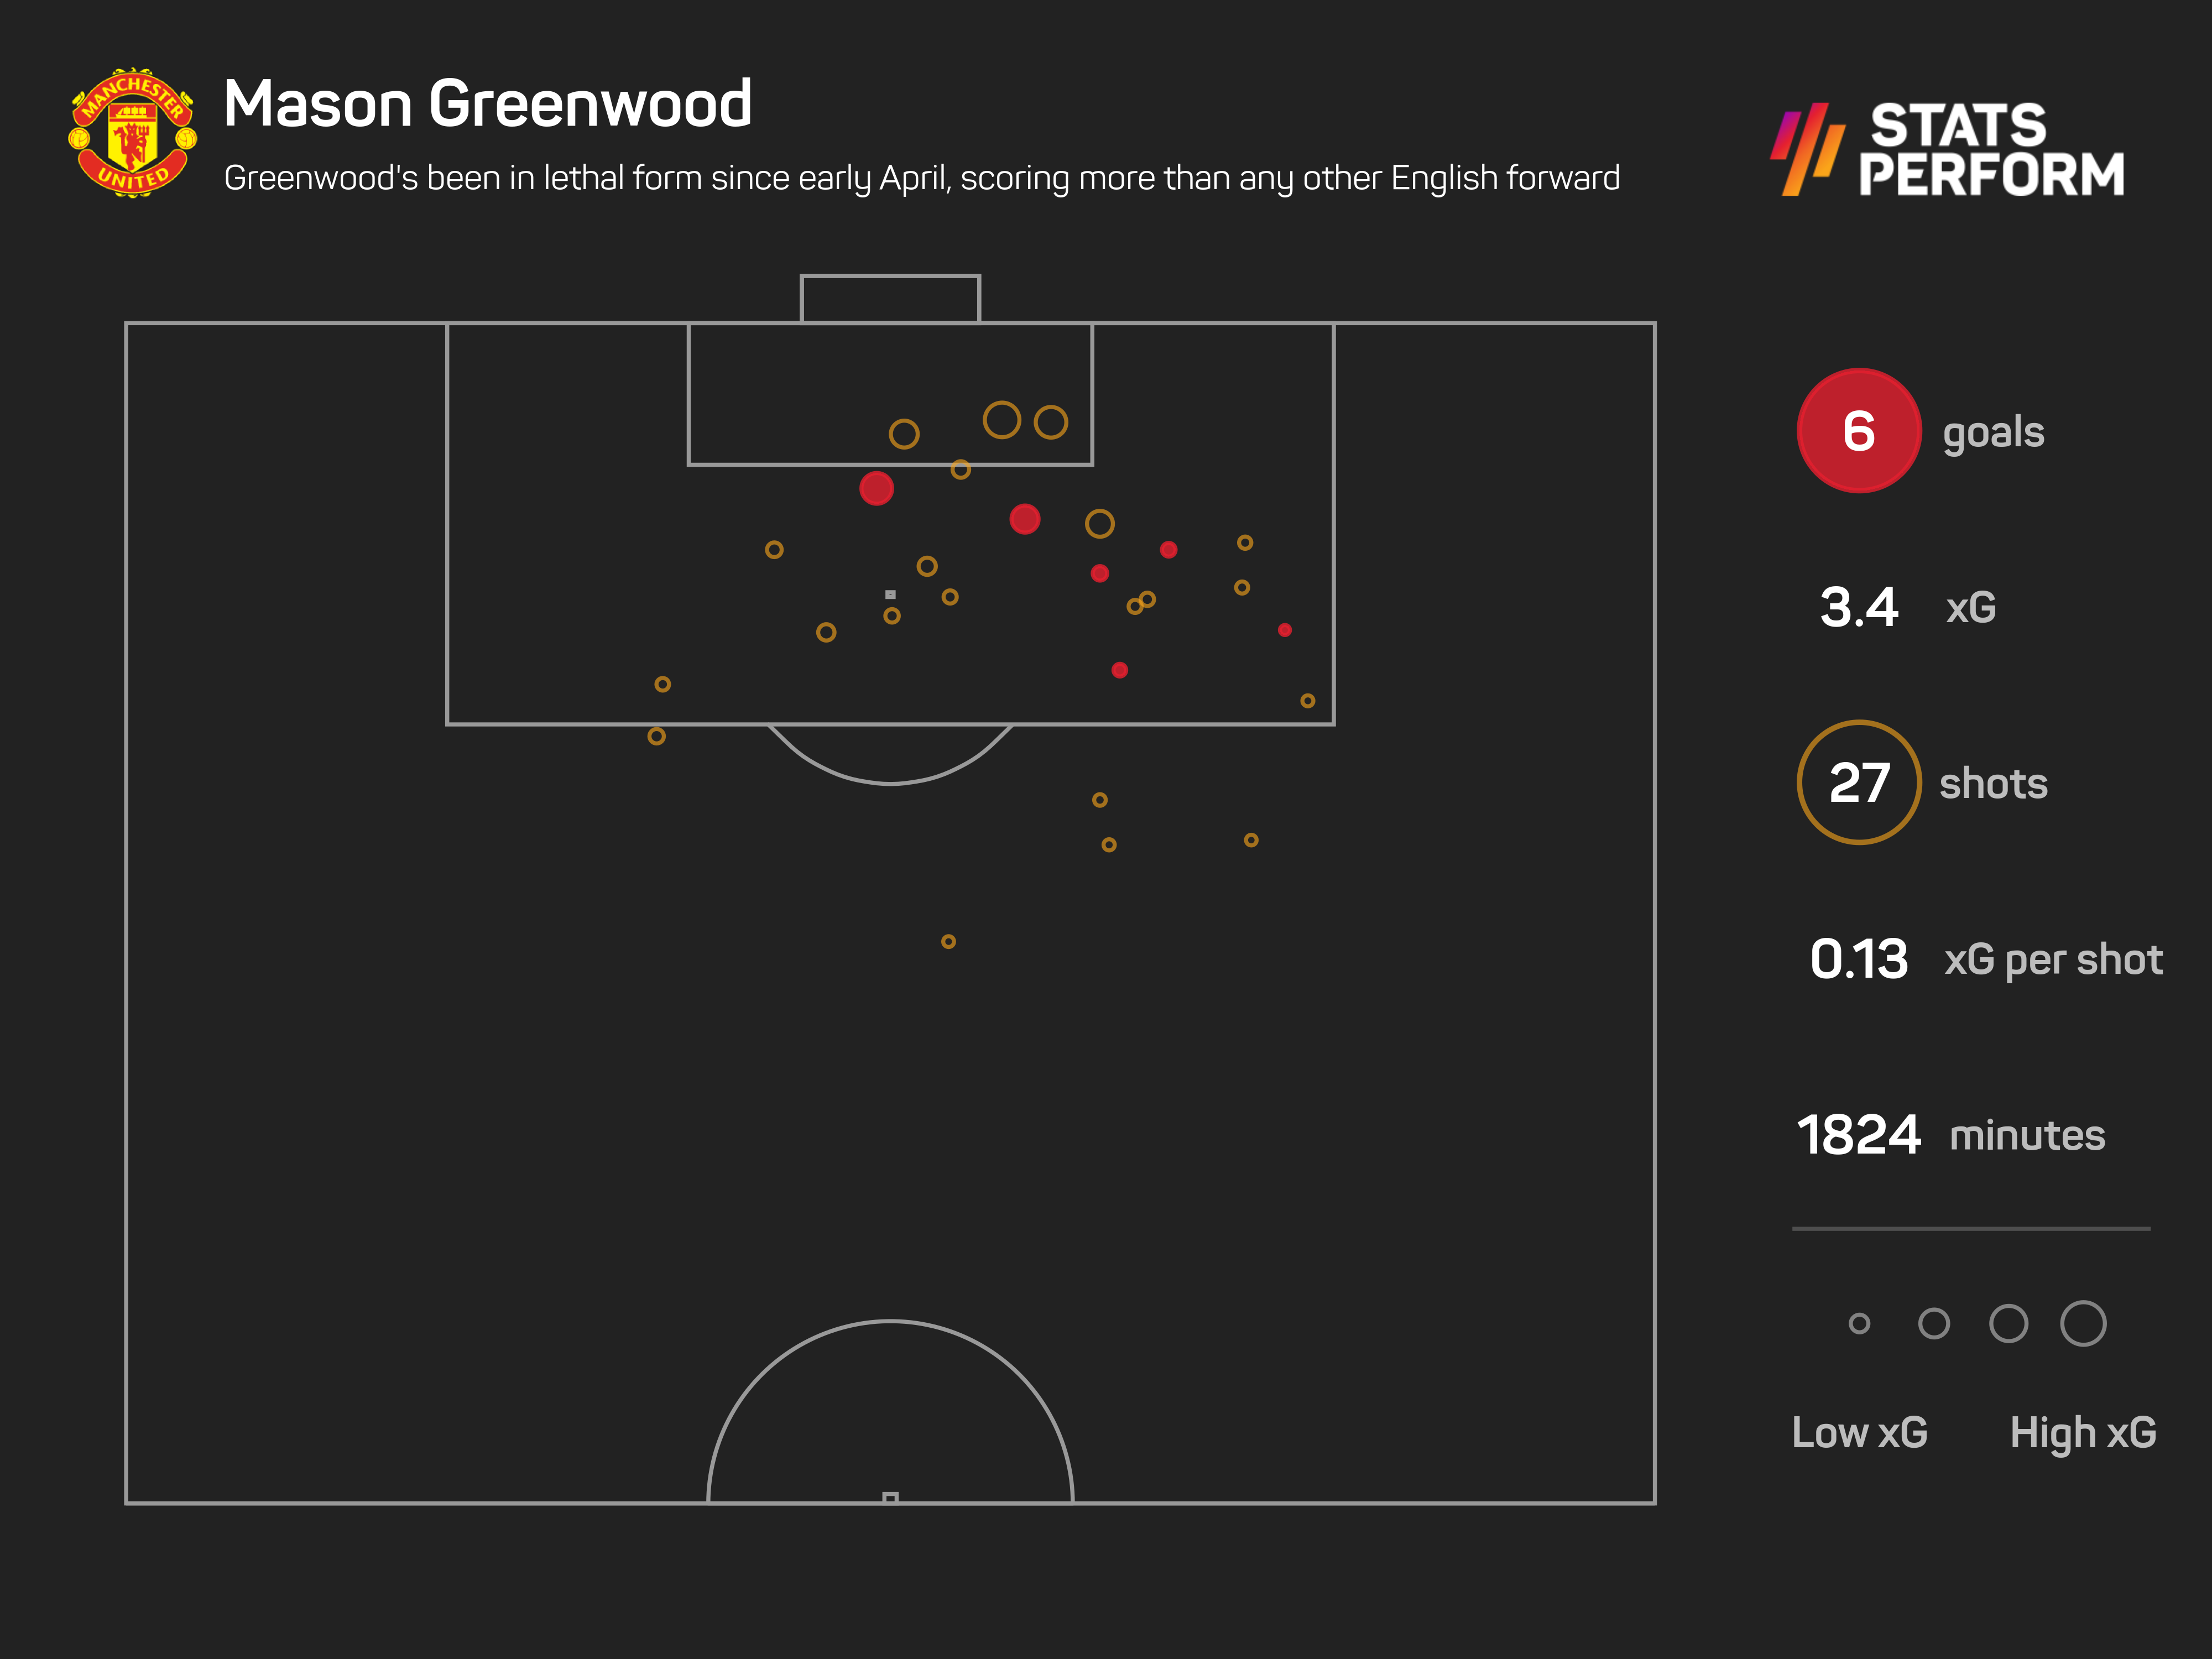 Greenwood has been in lethal form in the past six weeks